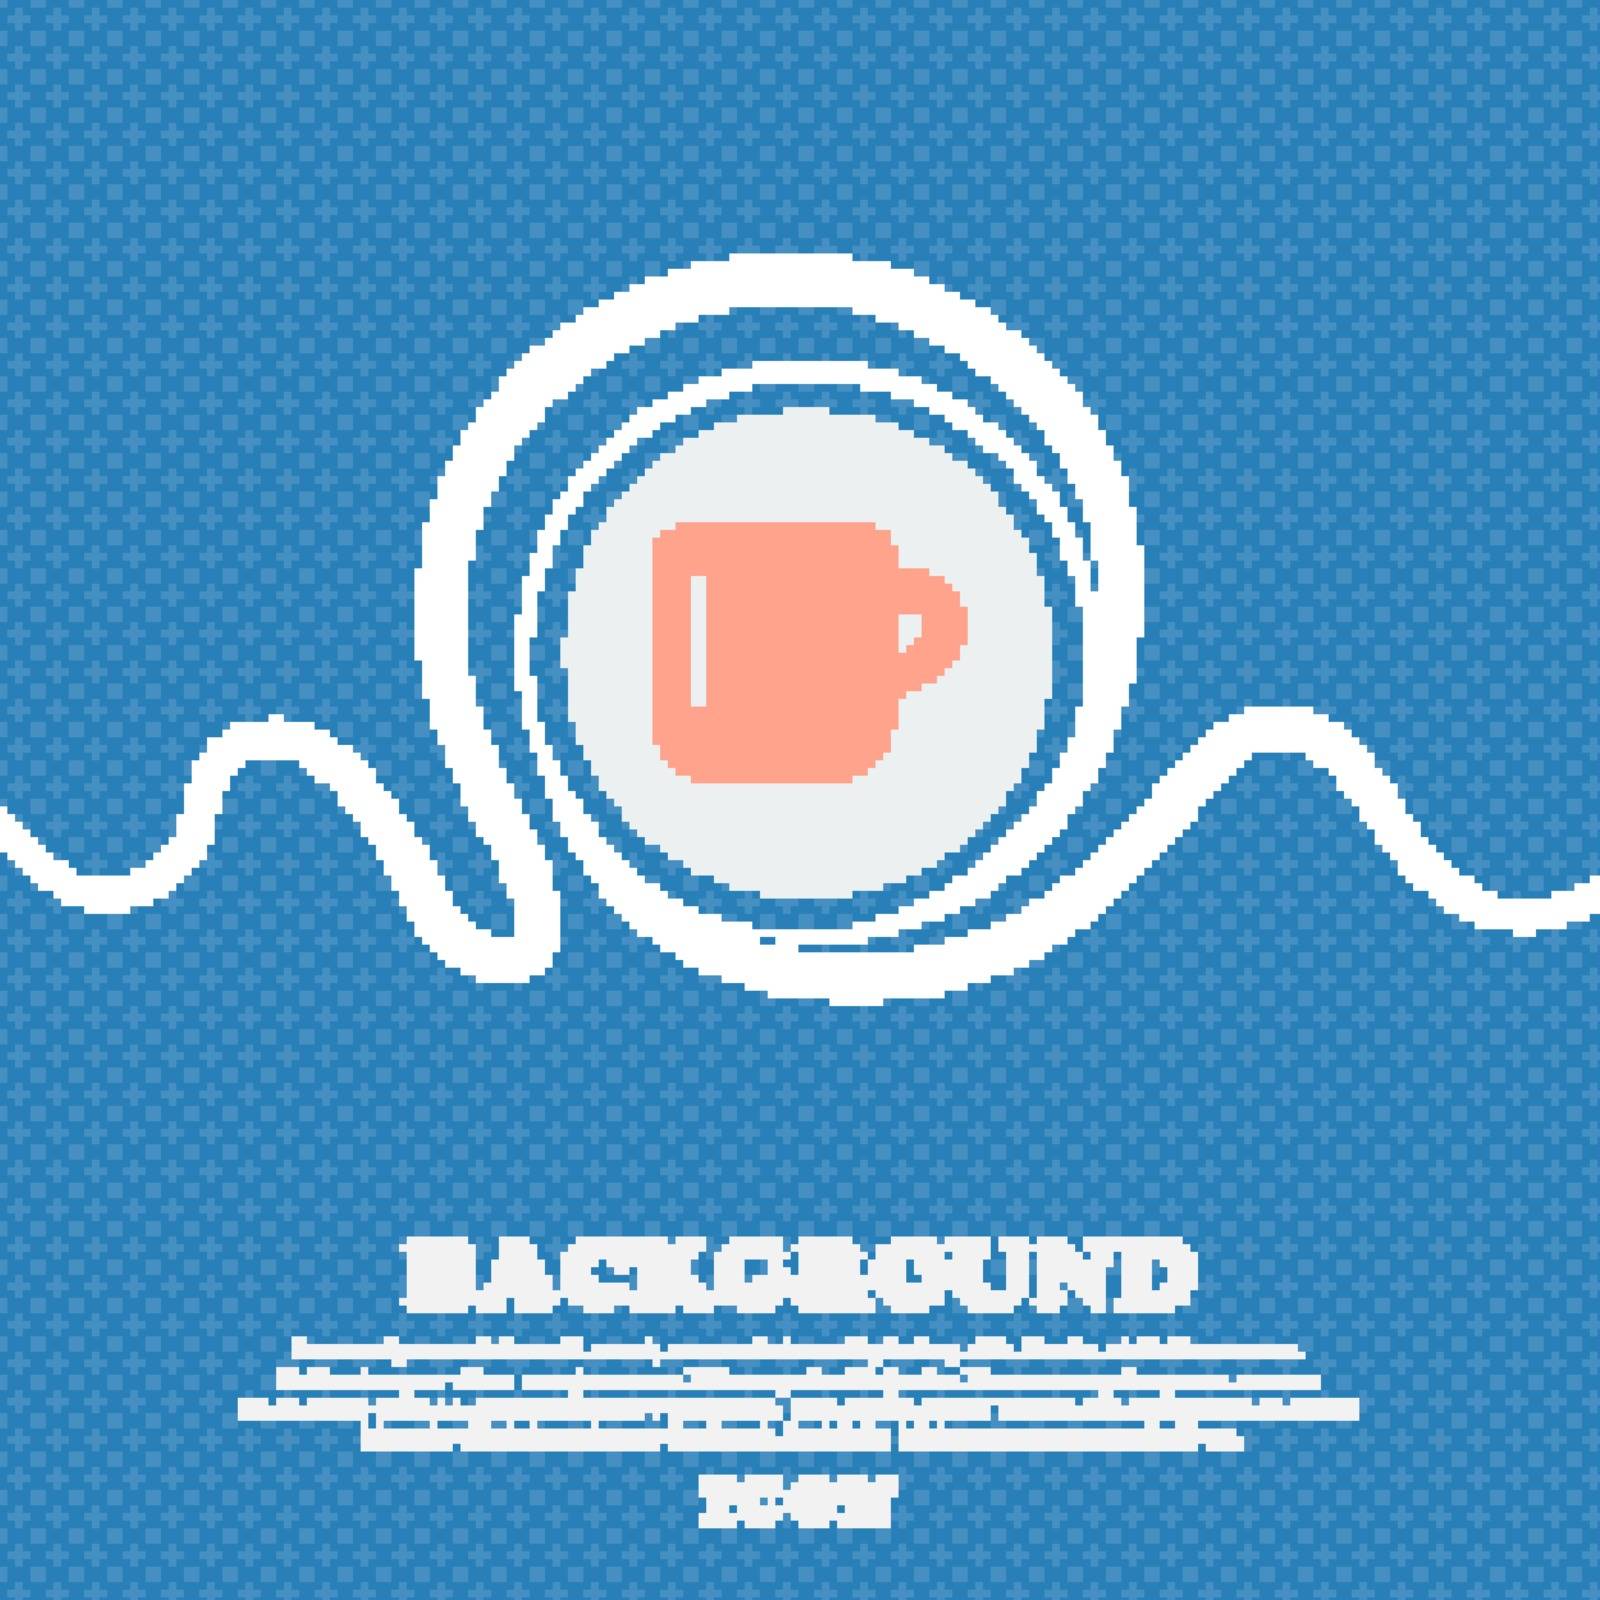 cup coffee or tea  sign icon. Blue and white abstract background flecked with space for text and your design. Vector illustration